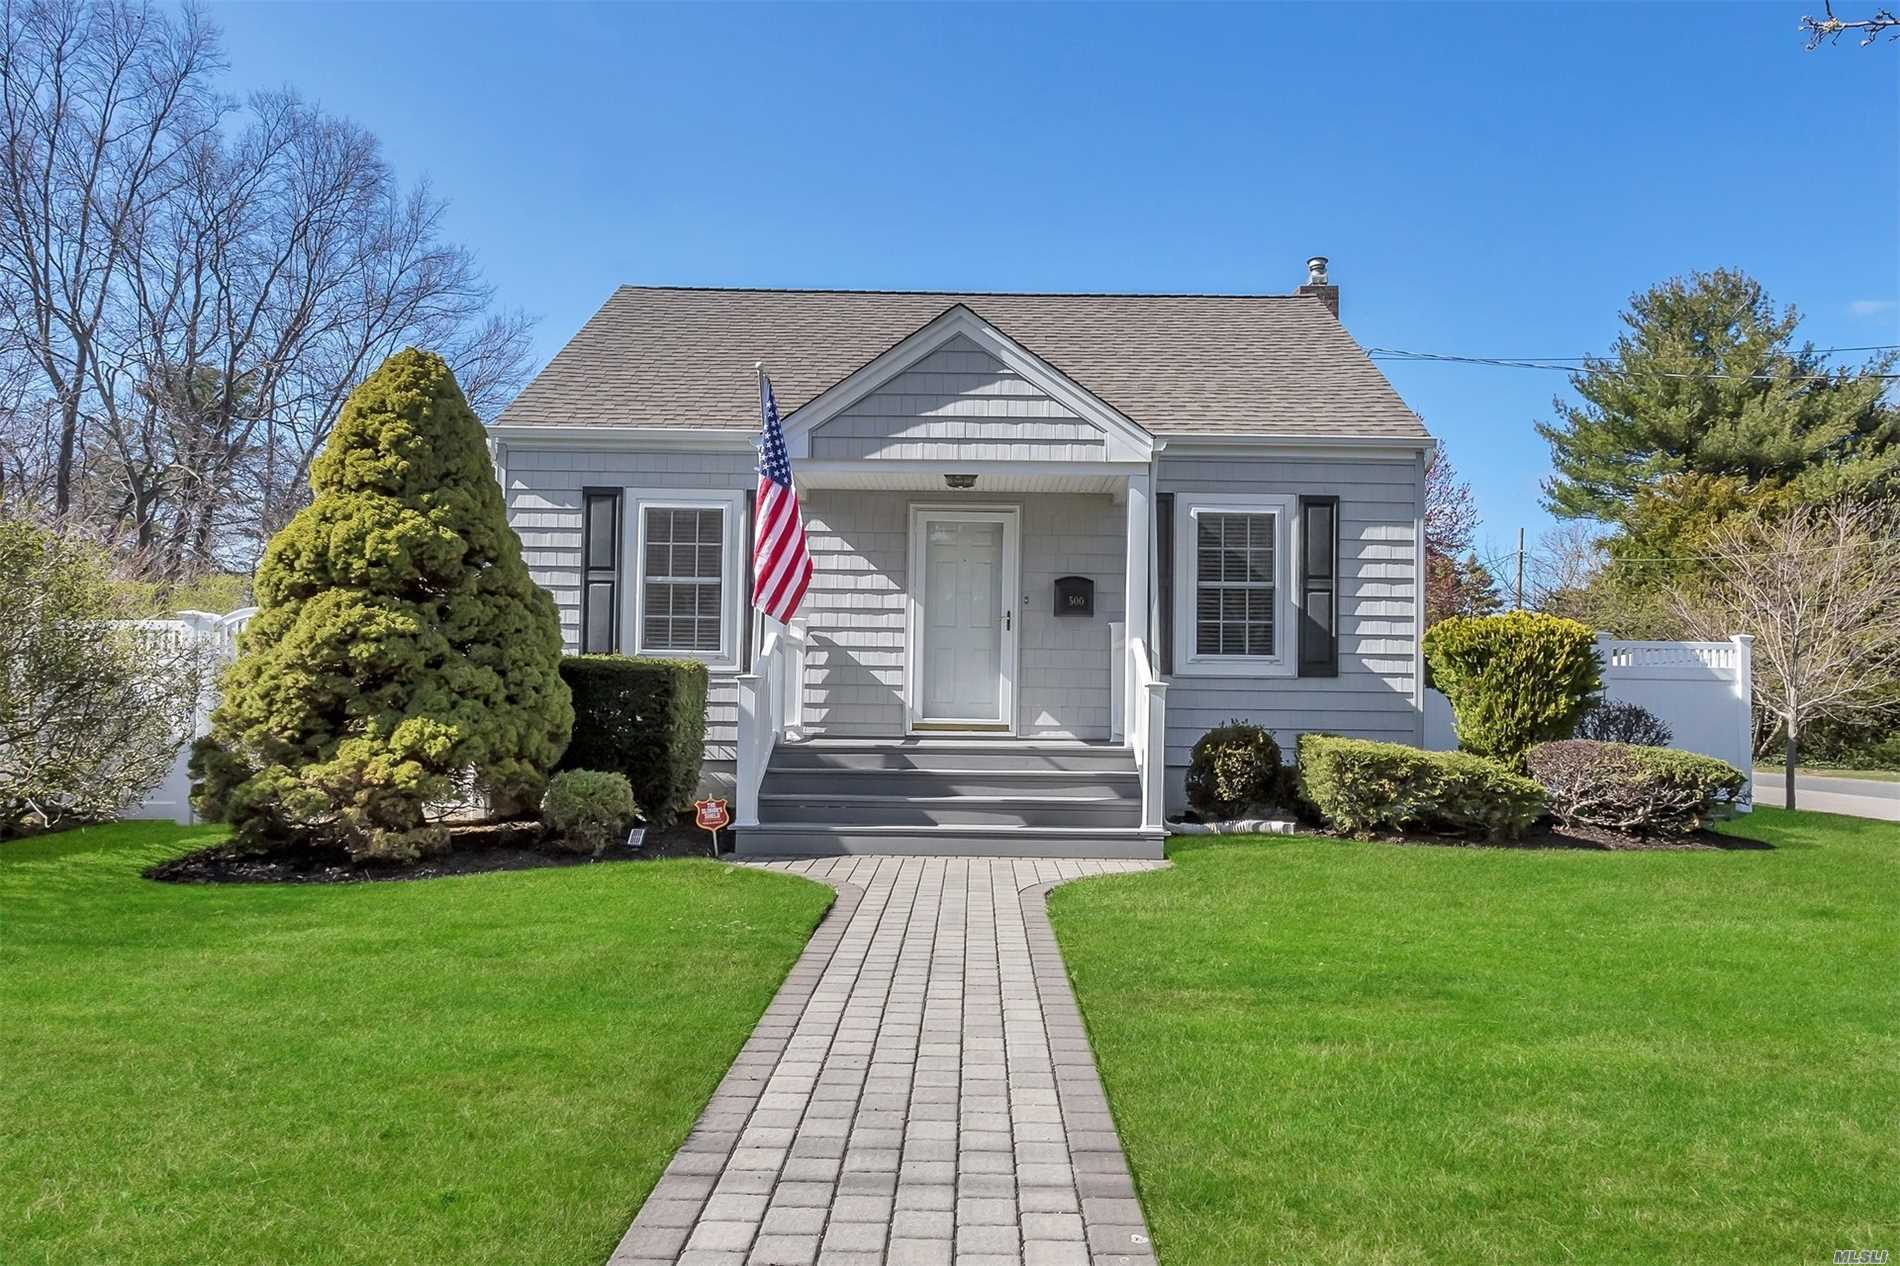 Beautifully Maintained Cape Cod! Lovely Neighborhood, Northport Schools, Updated Roof, Siding, Windows, Kitchen And Baths! New Paver Patio And Pvc Fence! Low Taxes Of $4123.50 This Is The One You Have Been Waiting For!!-